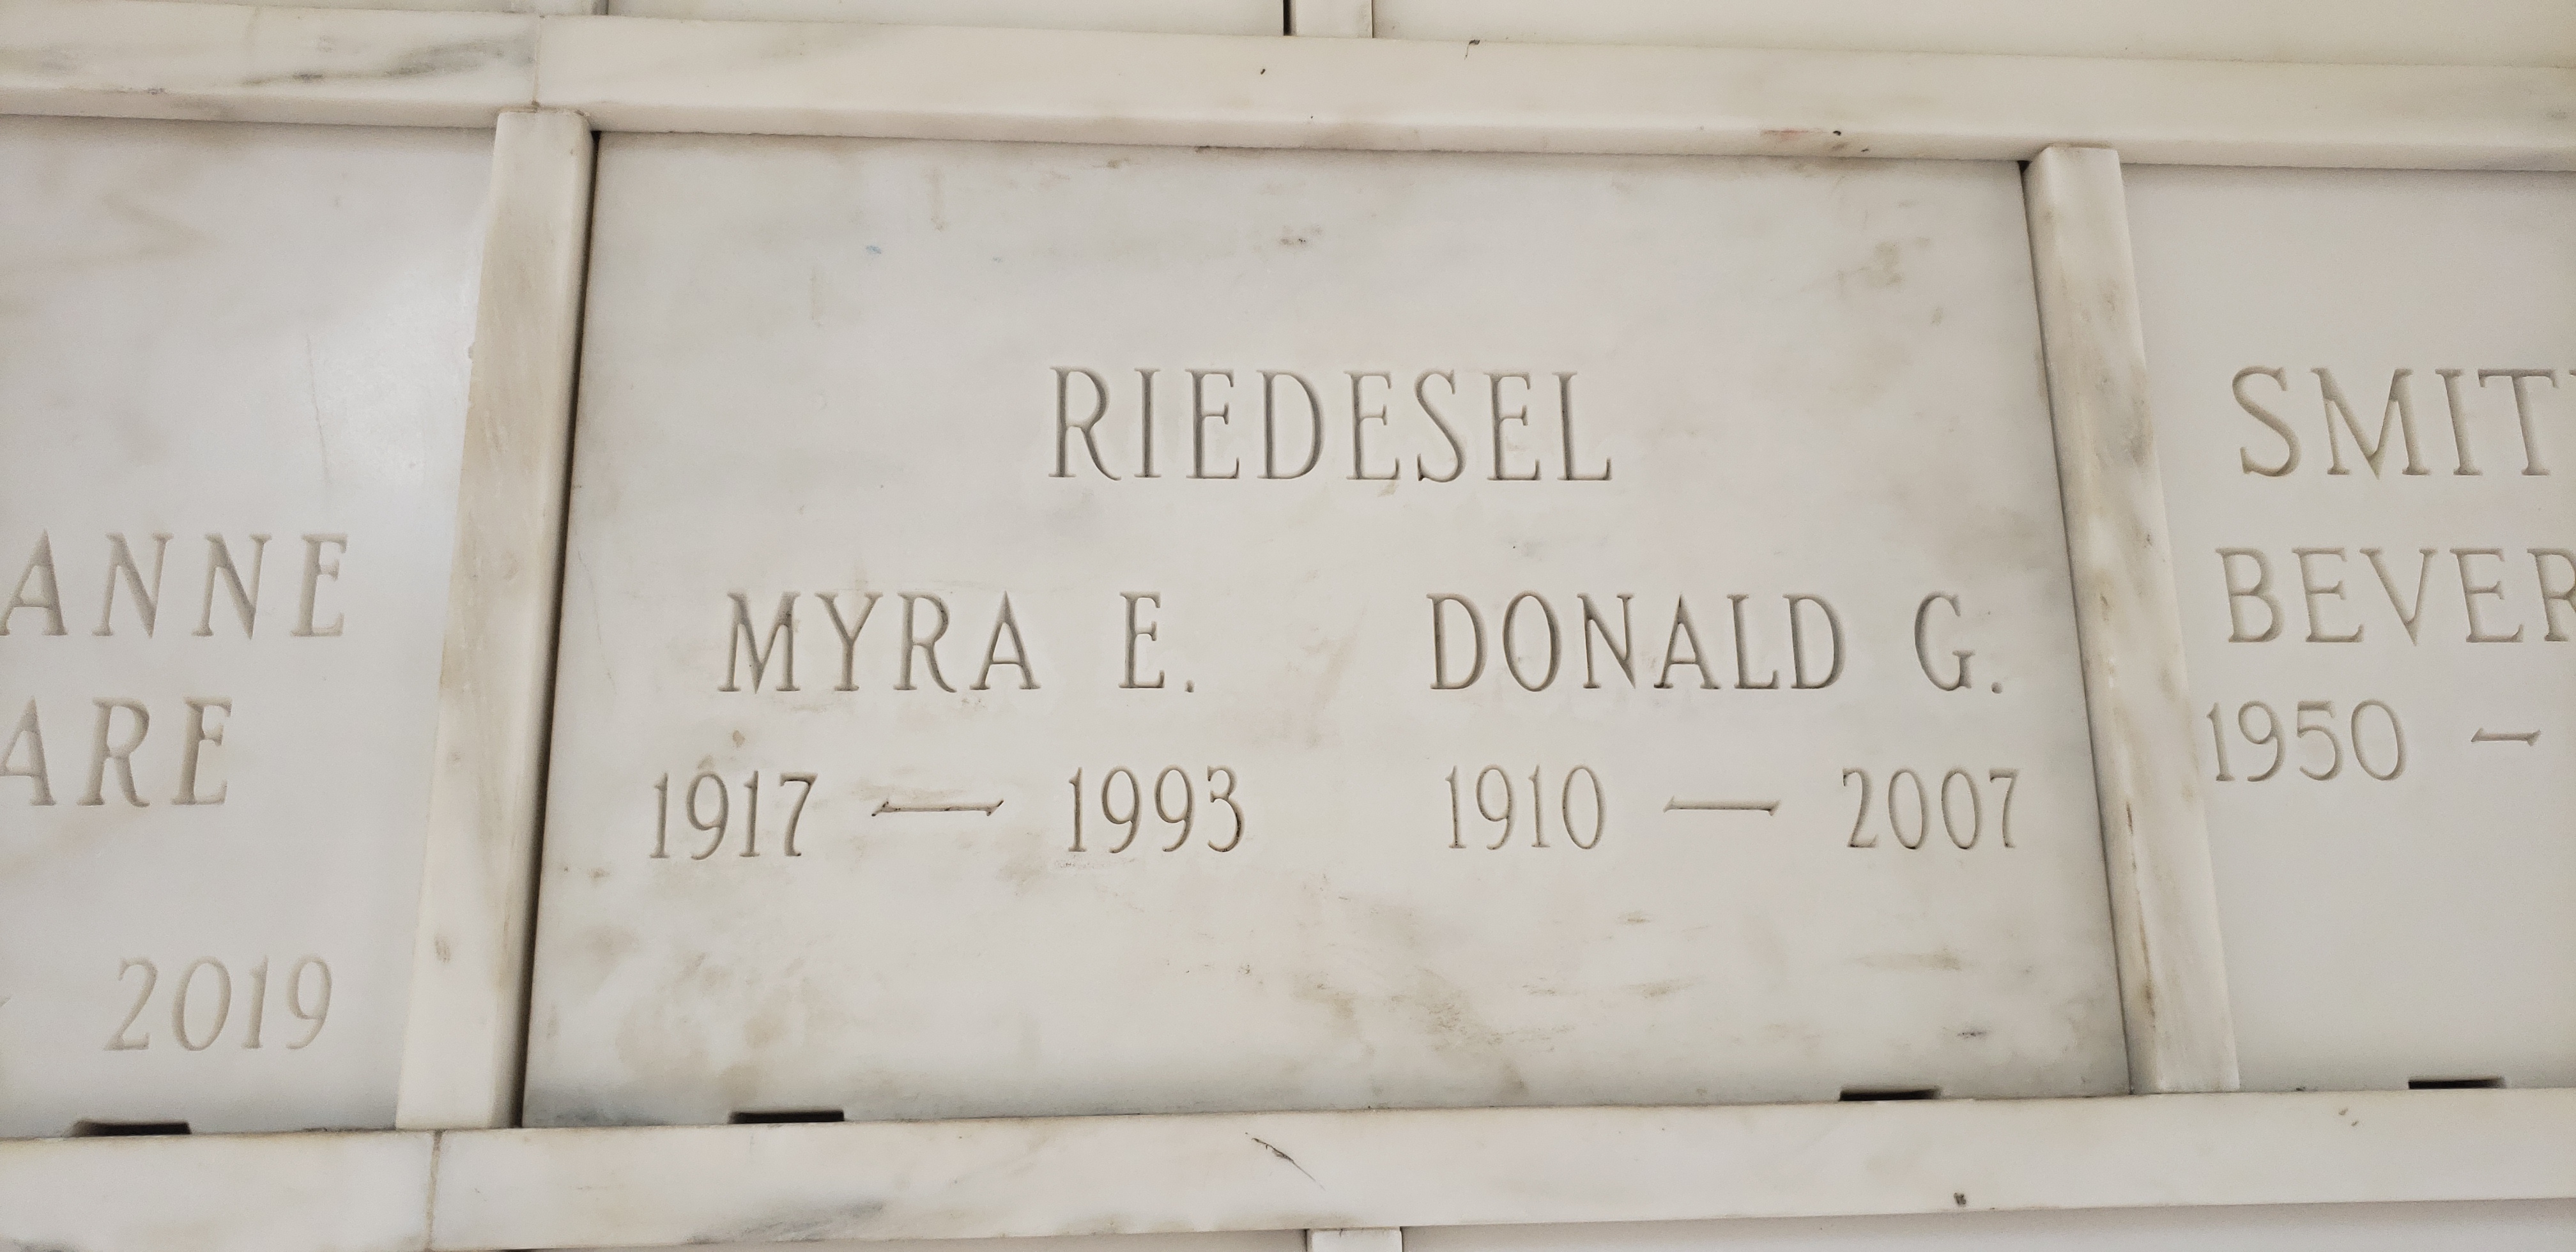 Donald G Riedesel